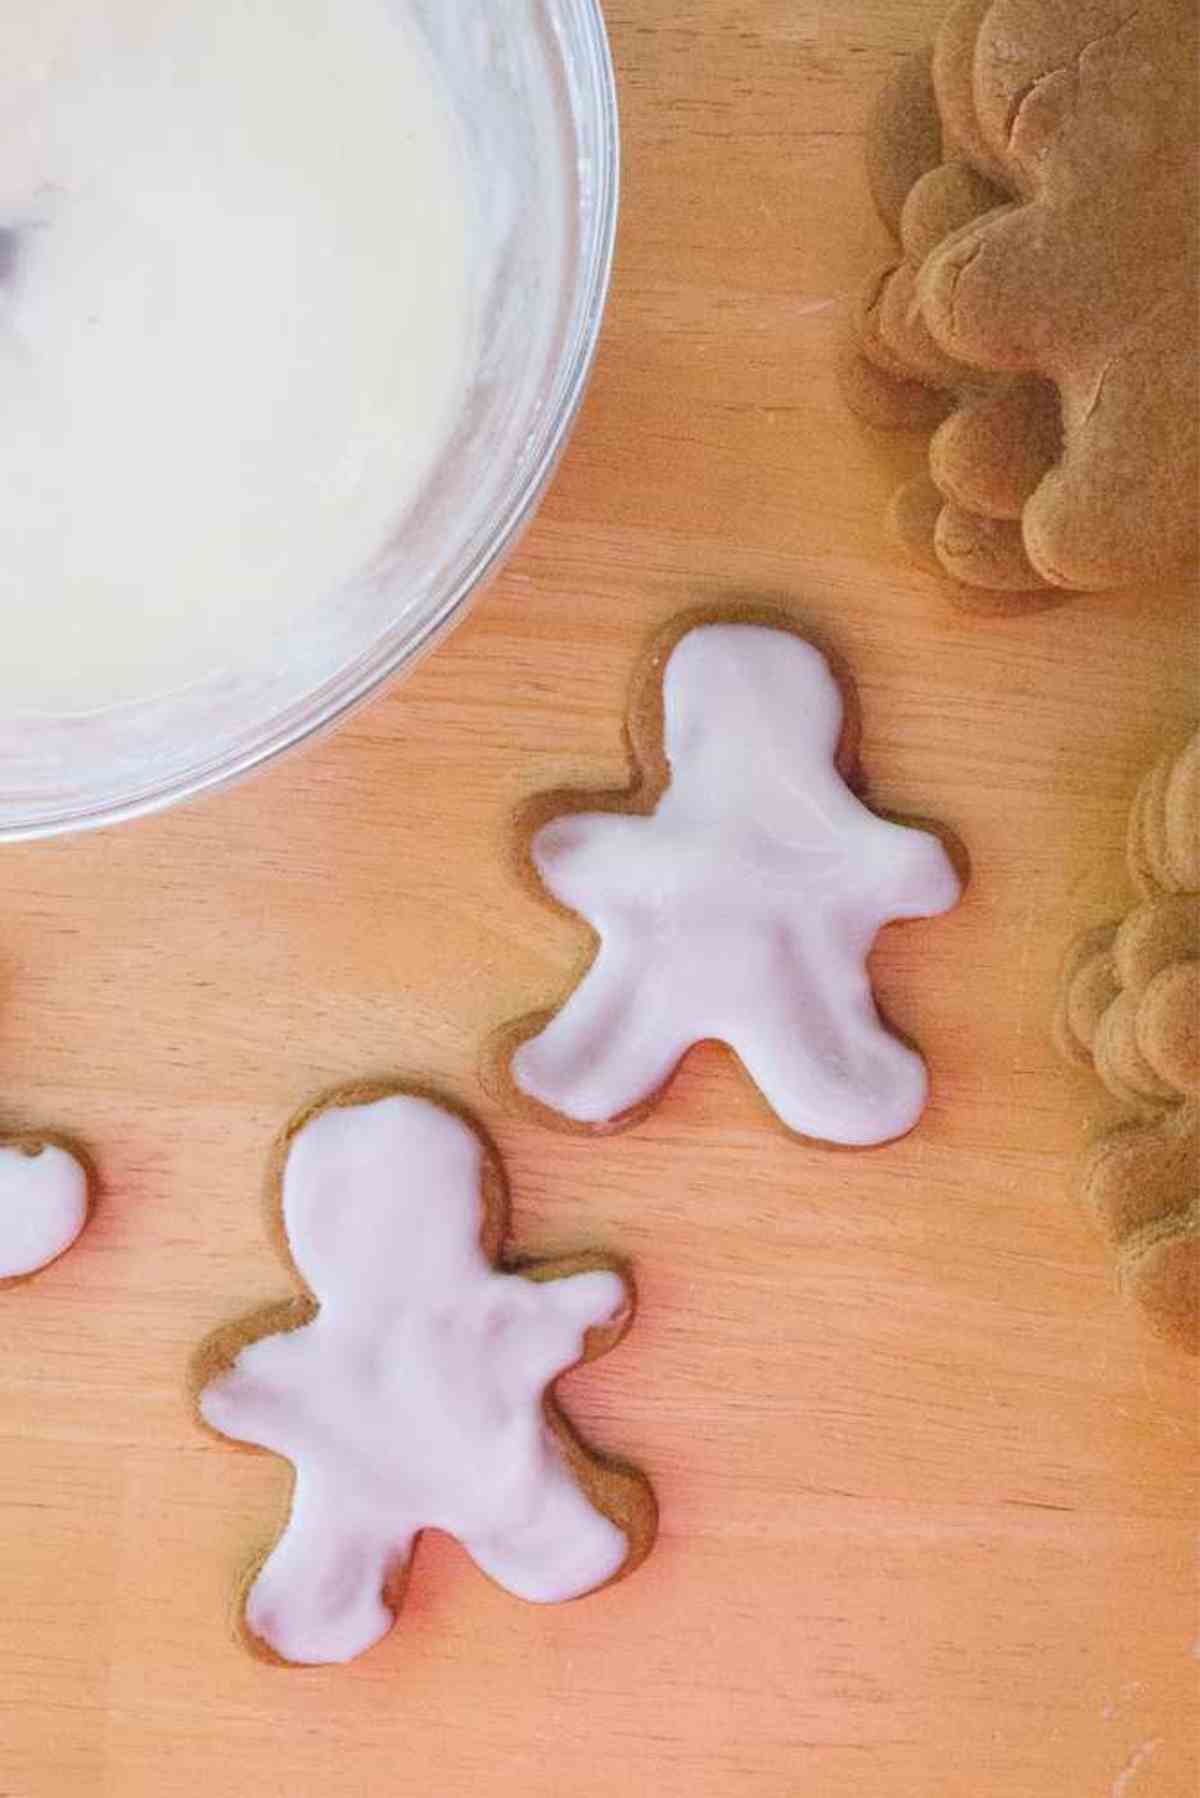 Gingerbread men iced with icing.